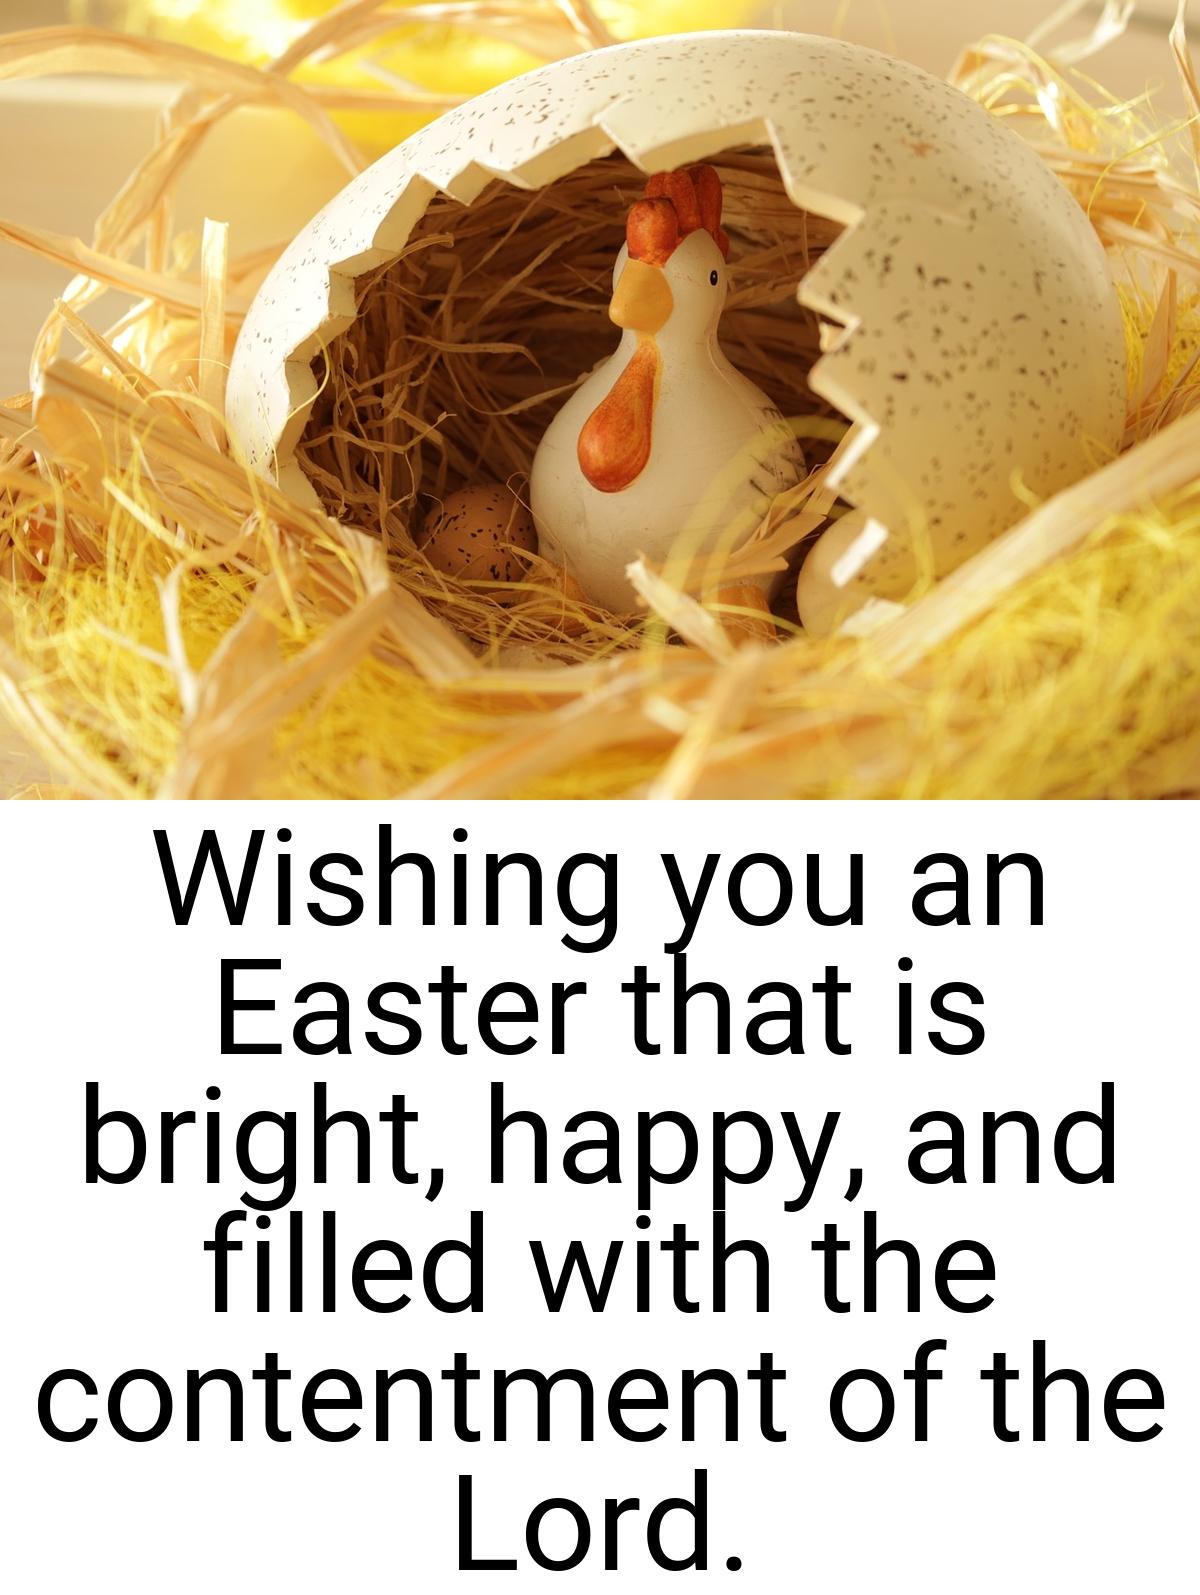 Wishing you an Easter that is bright, happy, and filled